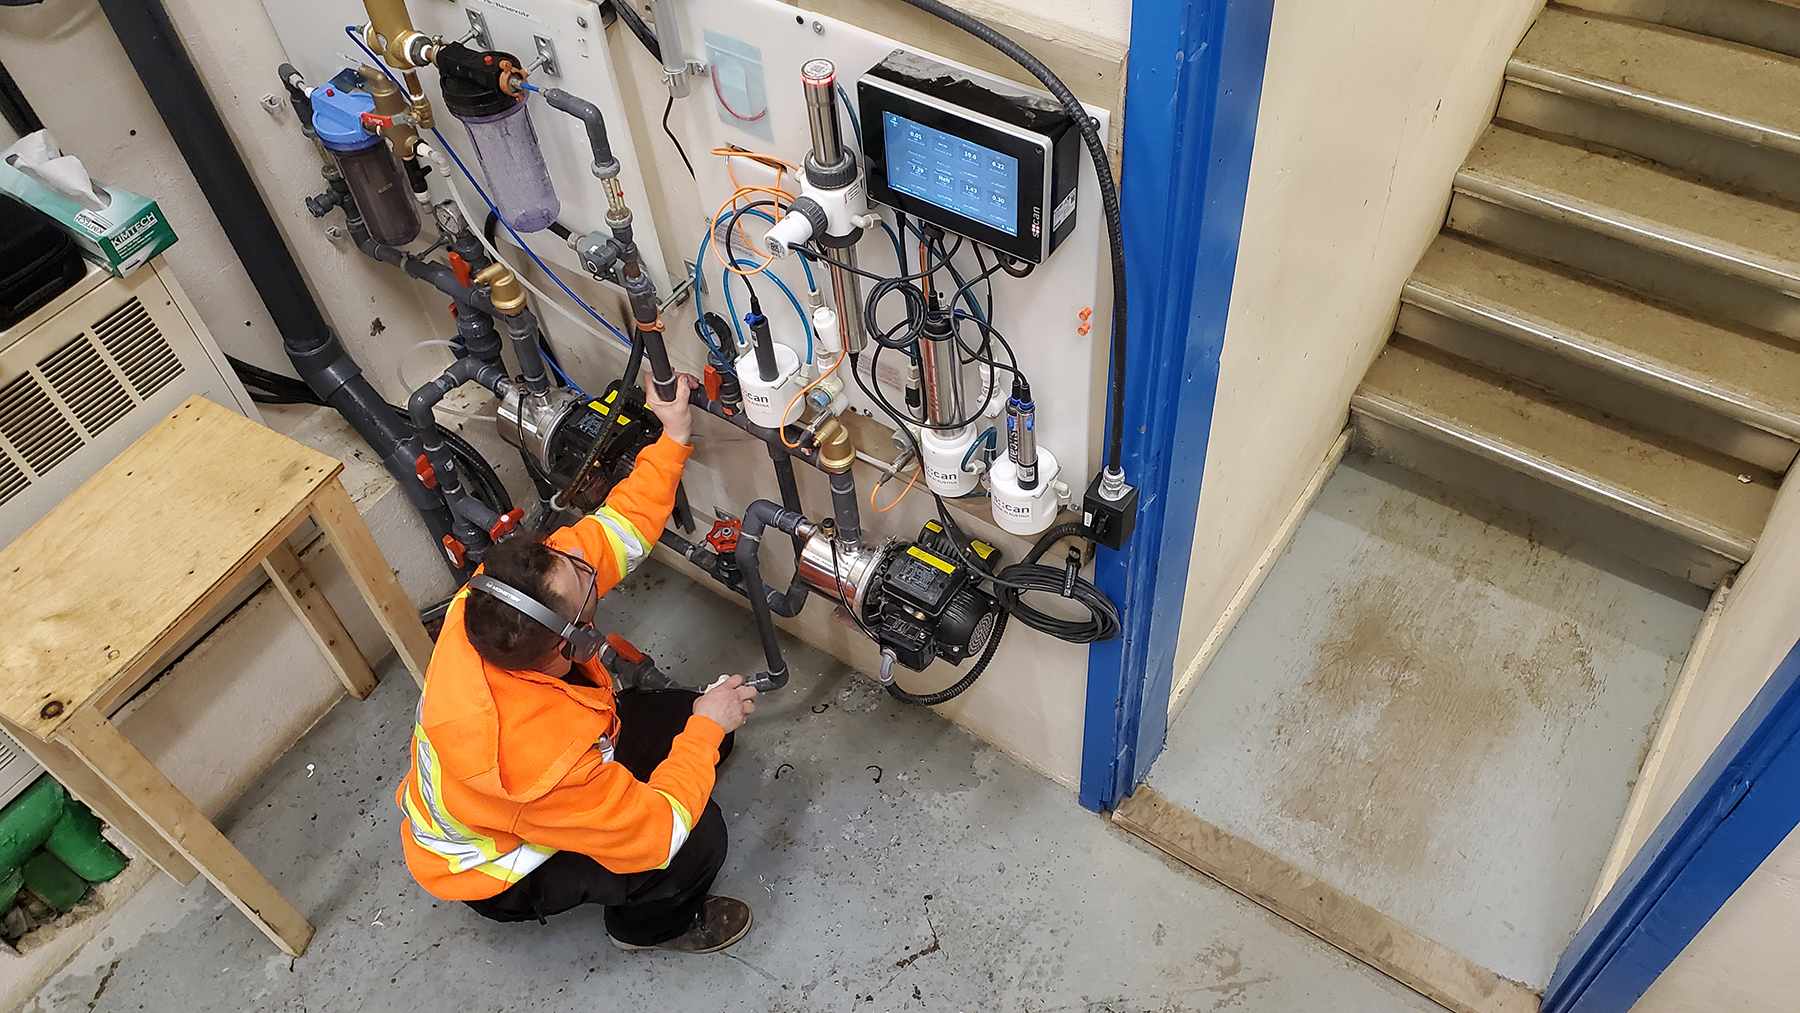 Charles Goss, Ph.D., the water team lead for global engineering firm WSP, calibrates the city of Iqaluit’s hydrocarbon monitoring system. (Image courtesy of WSP Canada Inc.)